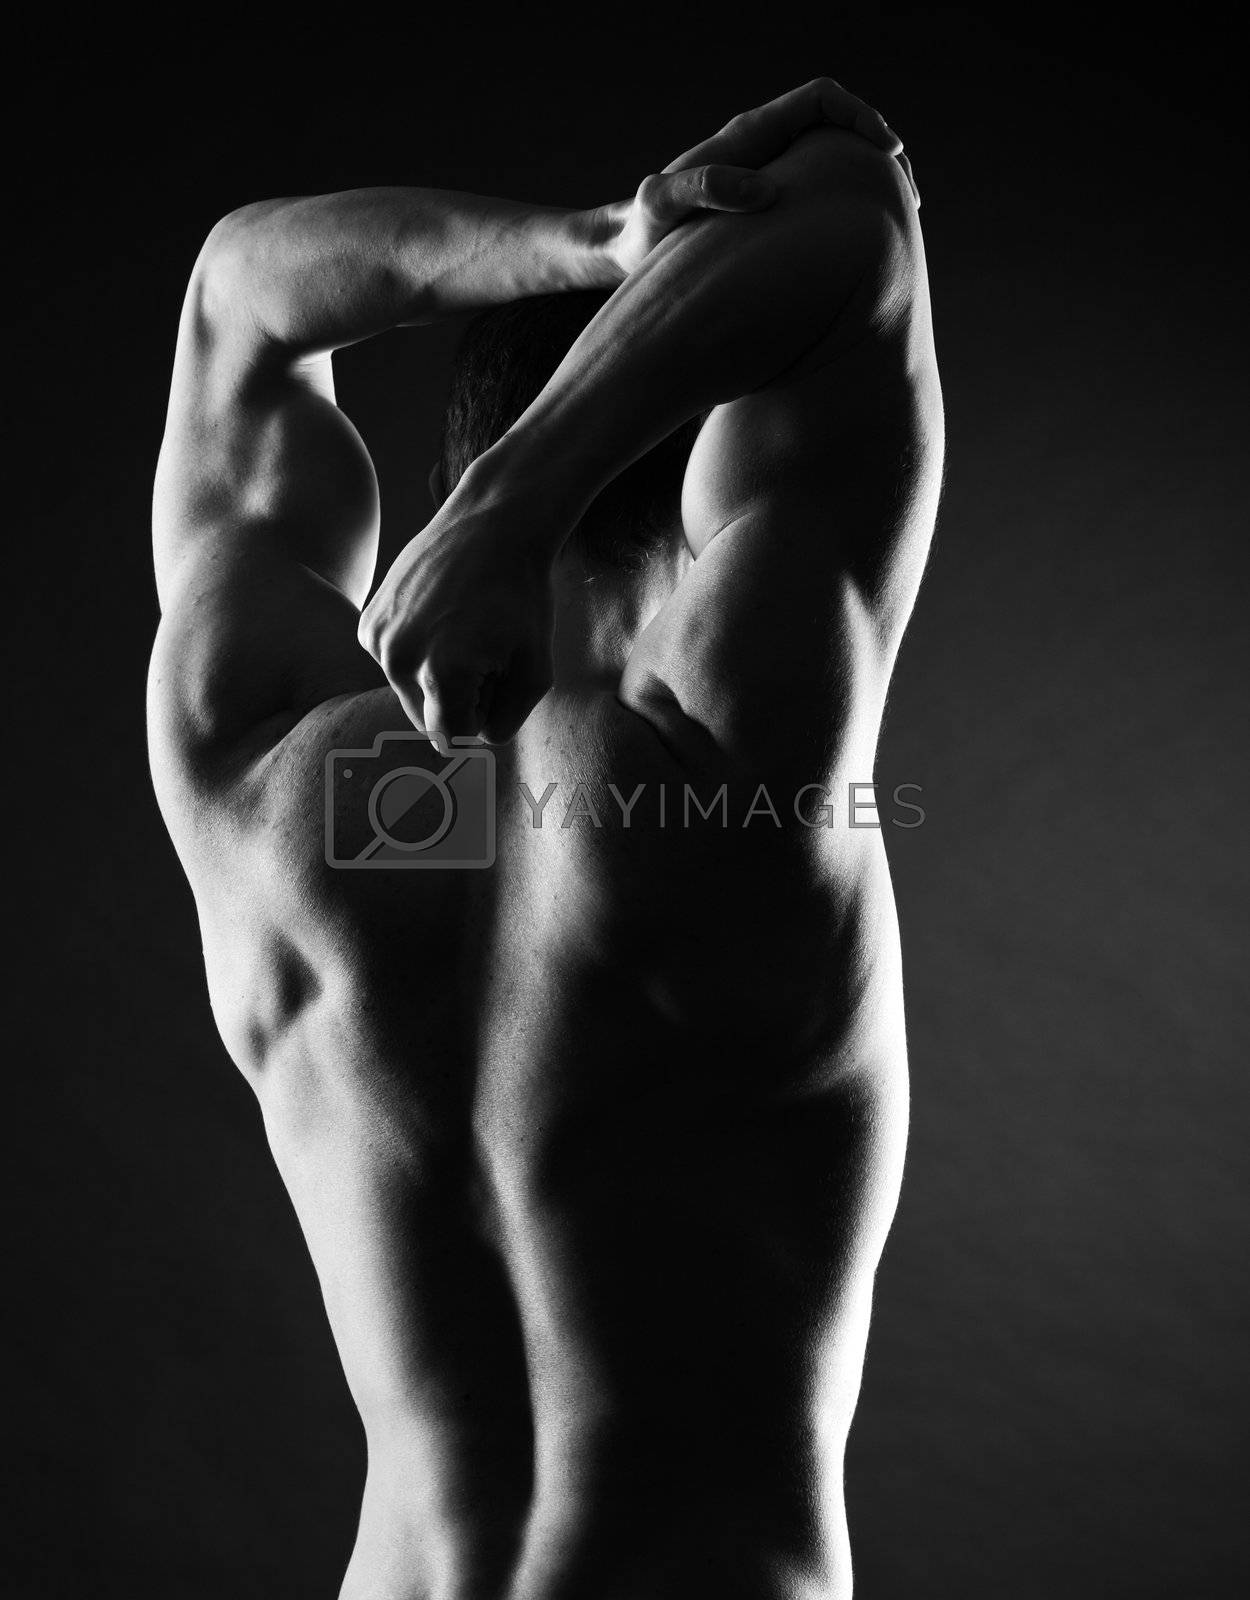 Royalty free image of Strong body by stokkete